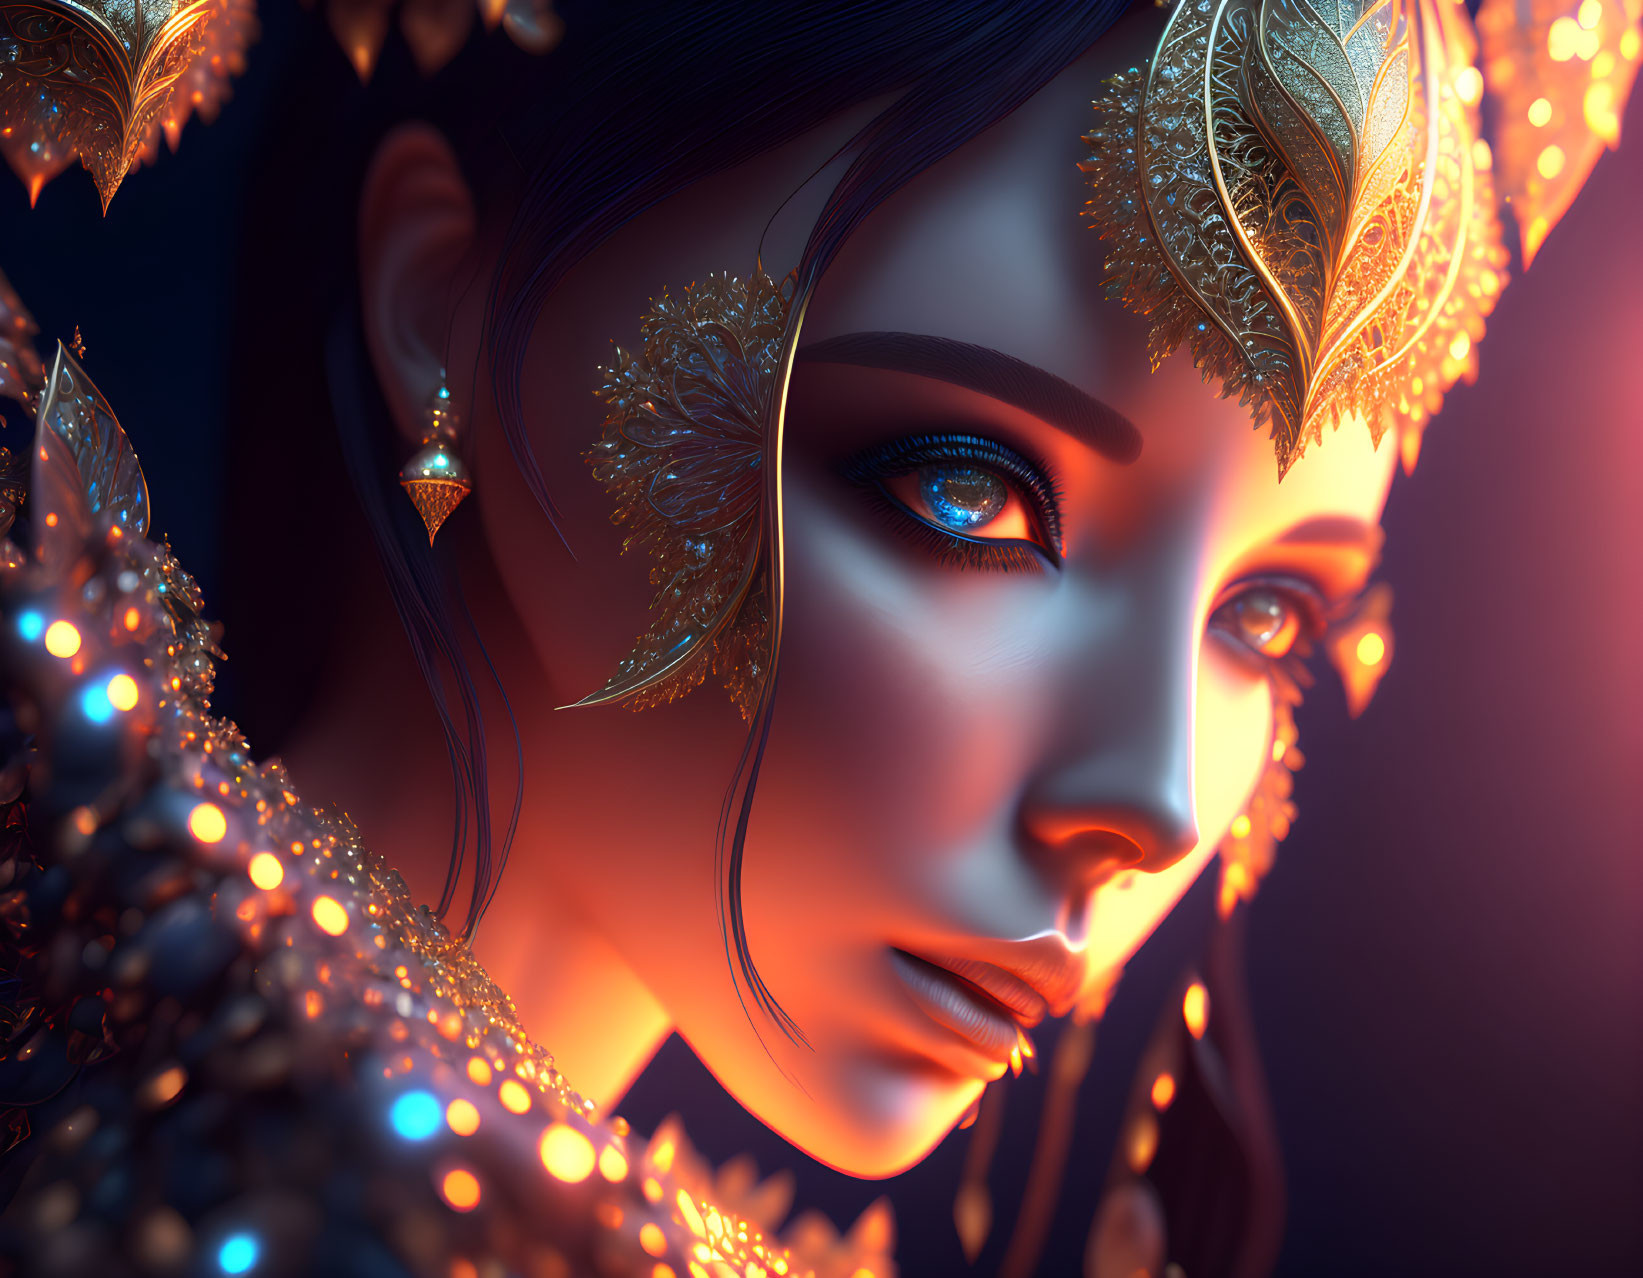 Digital Artwork: Woman with Glowing Blue Eyes and Golden Headdress